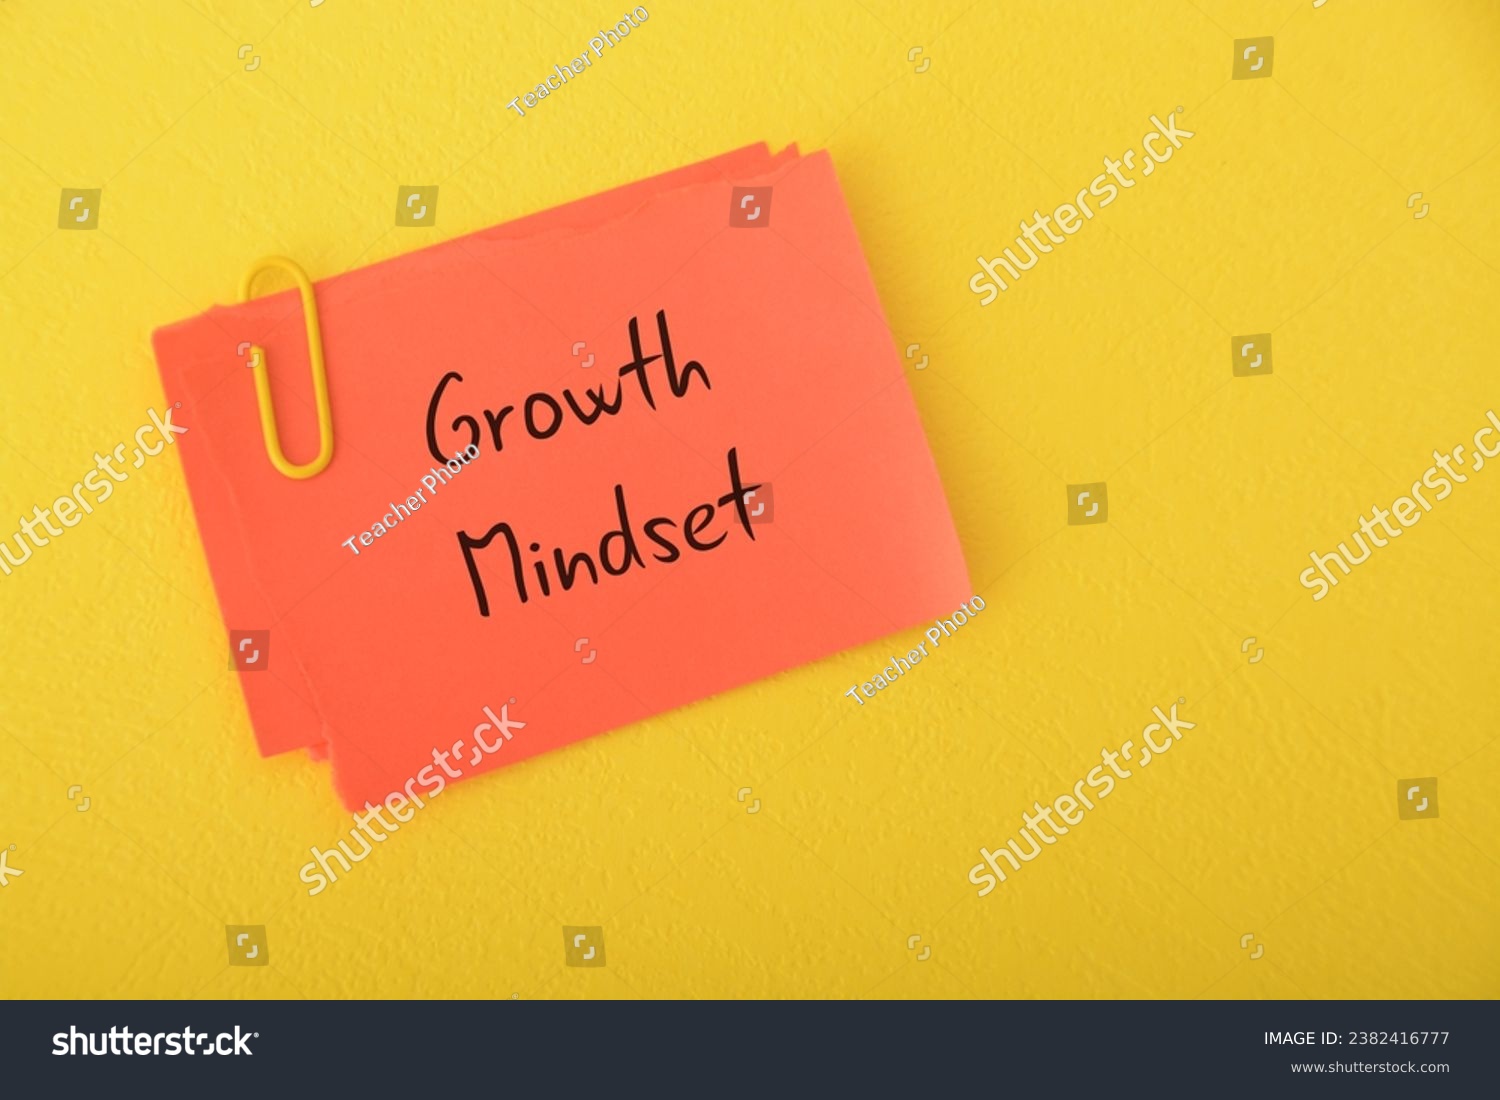 Growth mindset refers to the belief that individuals can develop their abilities, intelligence, and talents through effort, learning, and perseverance. #2382416777